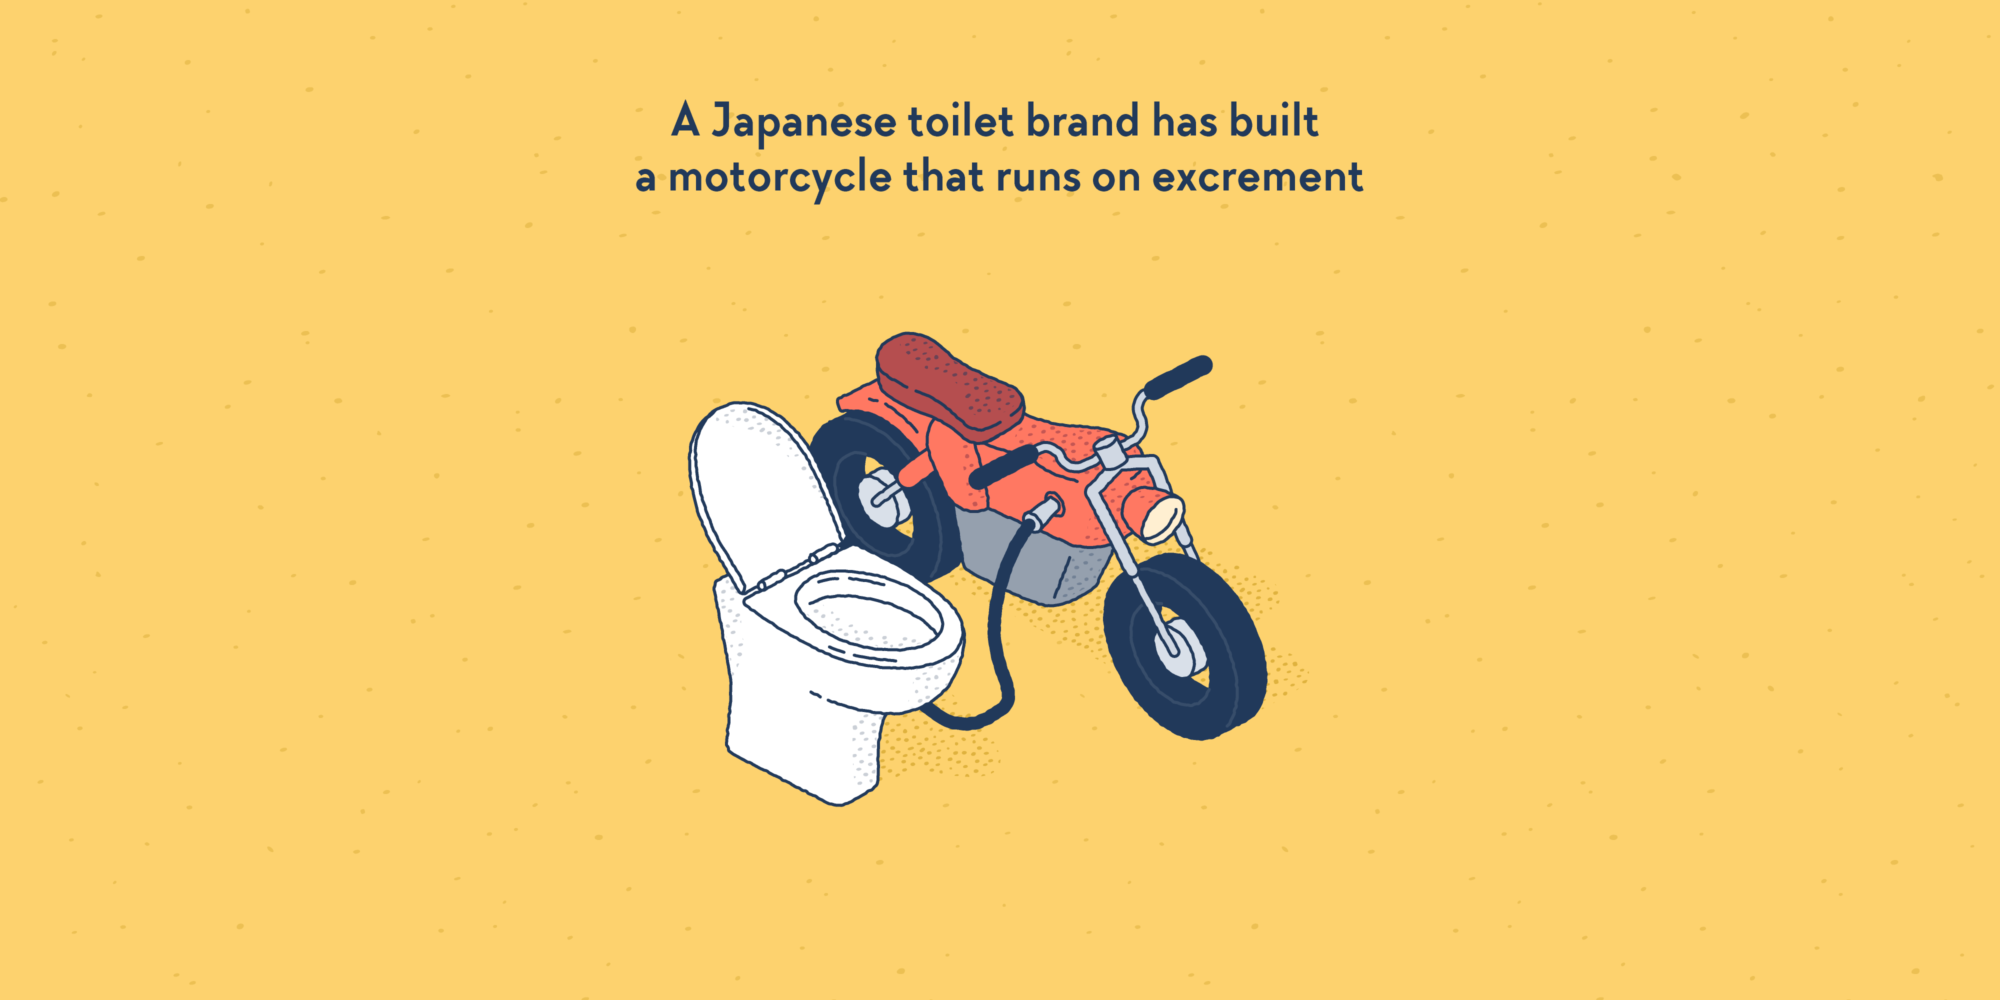 A motorcycle getting is tank filled up through a pipe connected to a toilet.